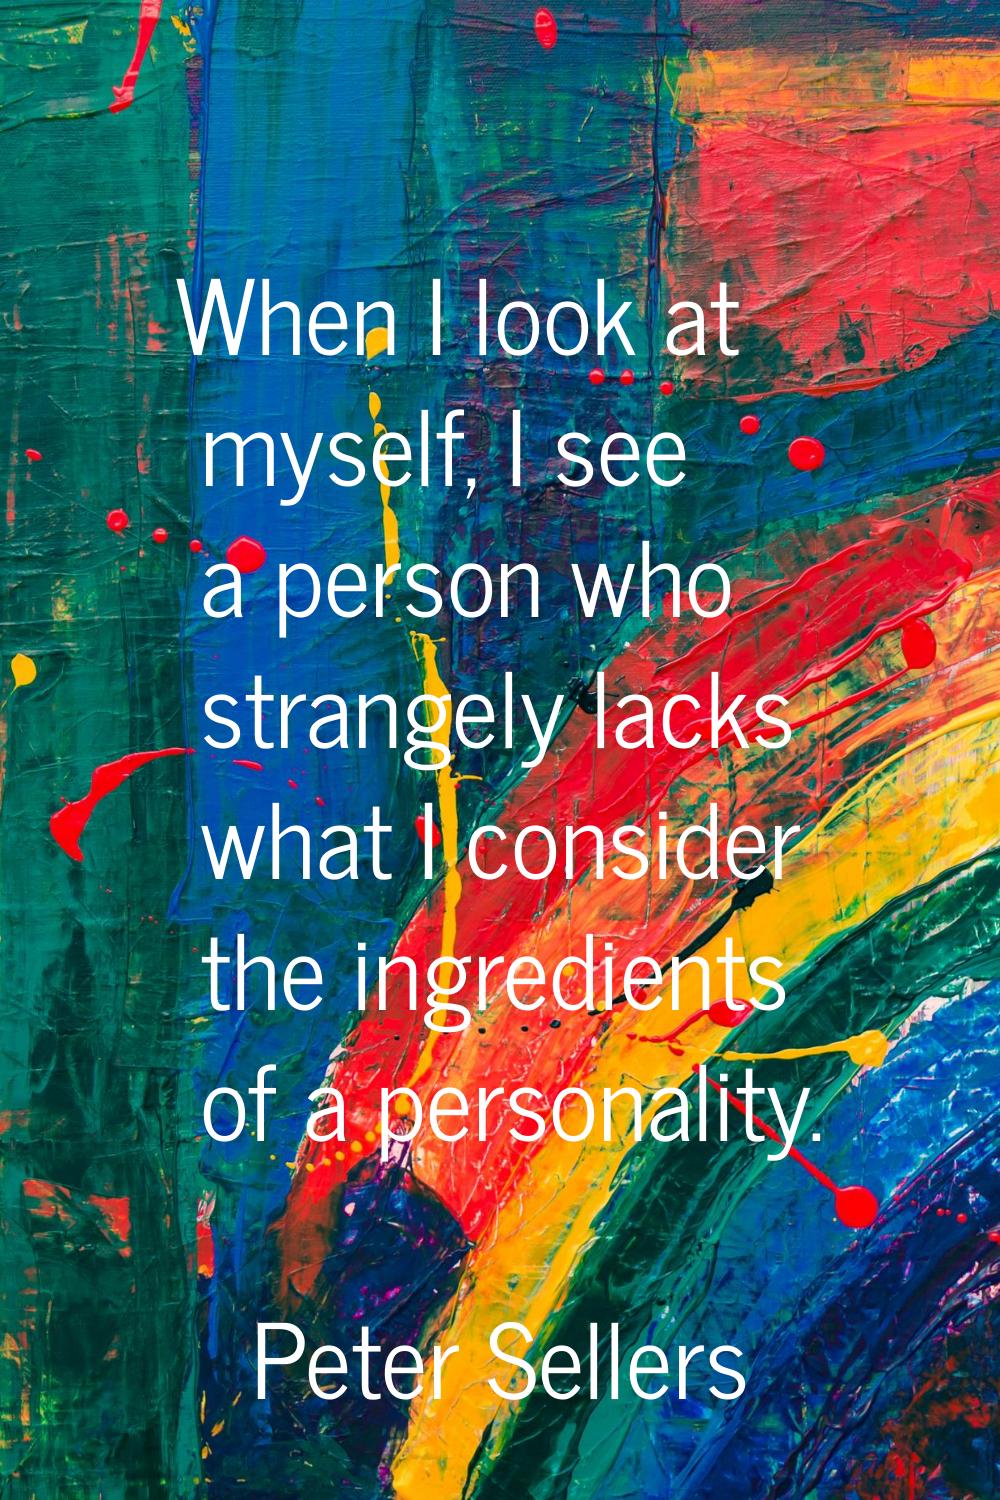 When I look at myself, I see a person who strangely lacks what I consider the ingredients of a pers